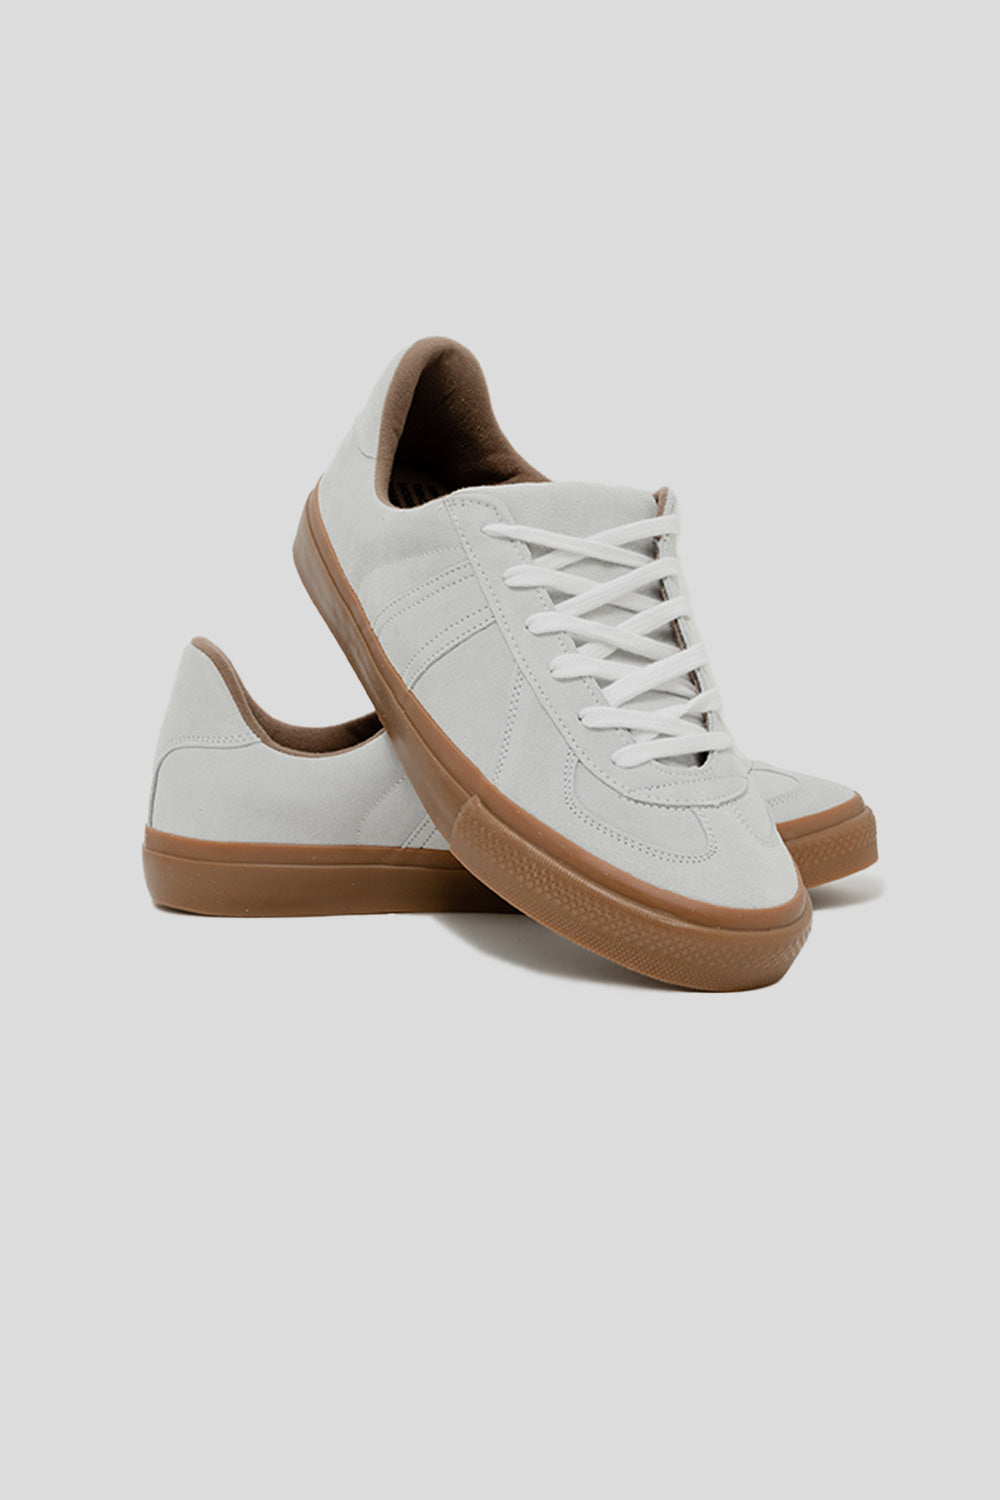 Reproduction of Found German Military Trainer in White Suede